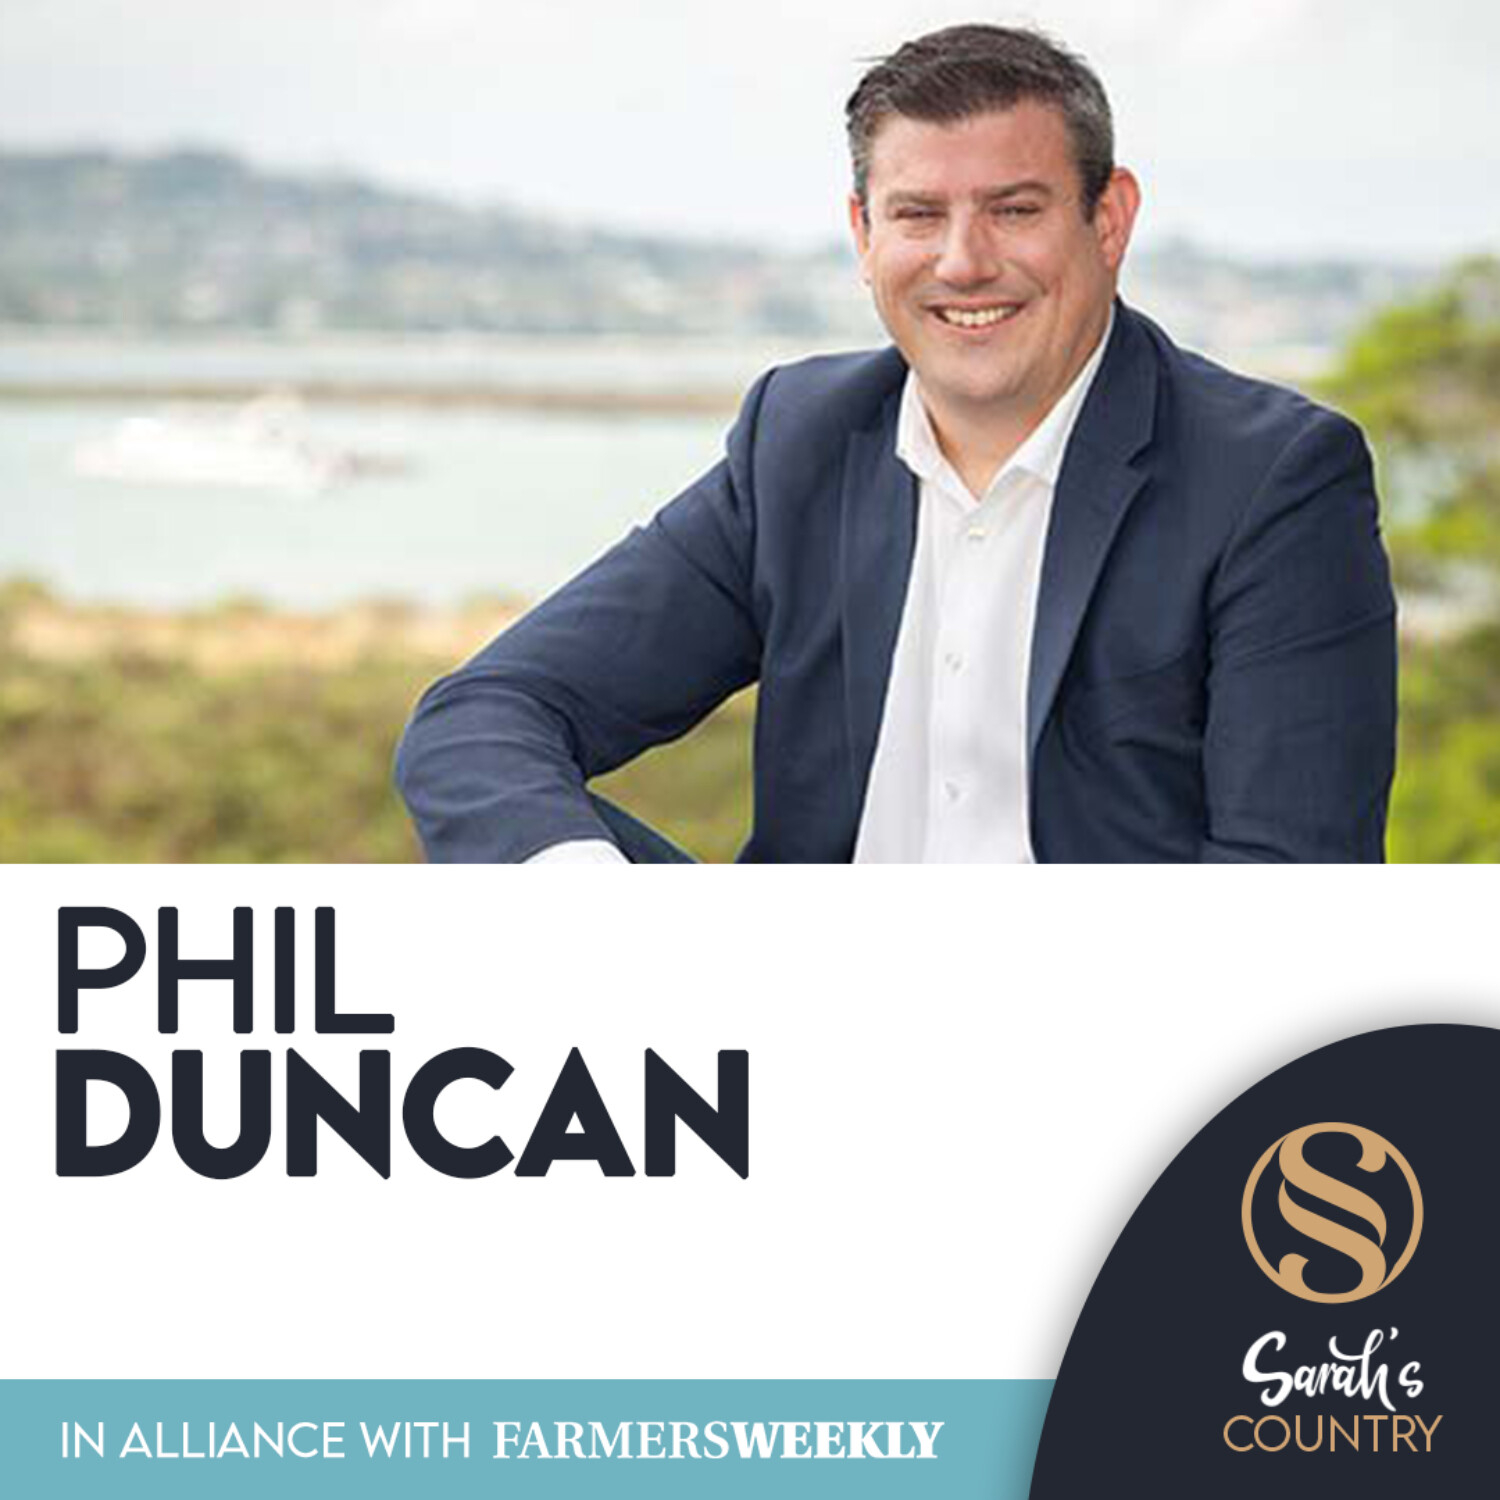 Phil Duncan | “Rural support available for dry north”